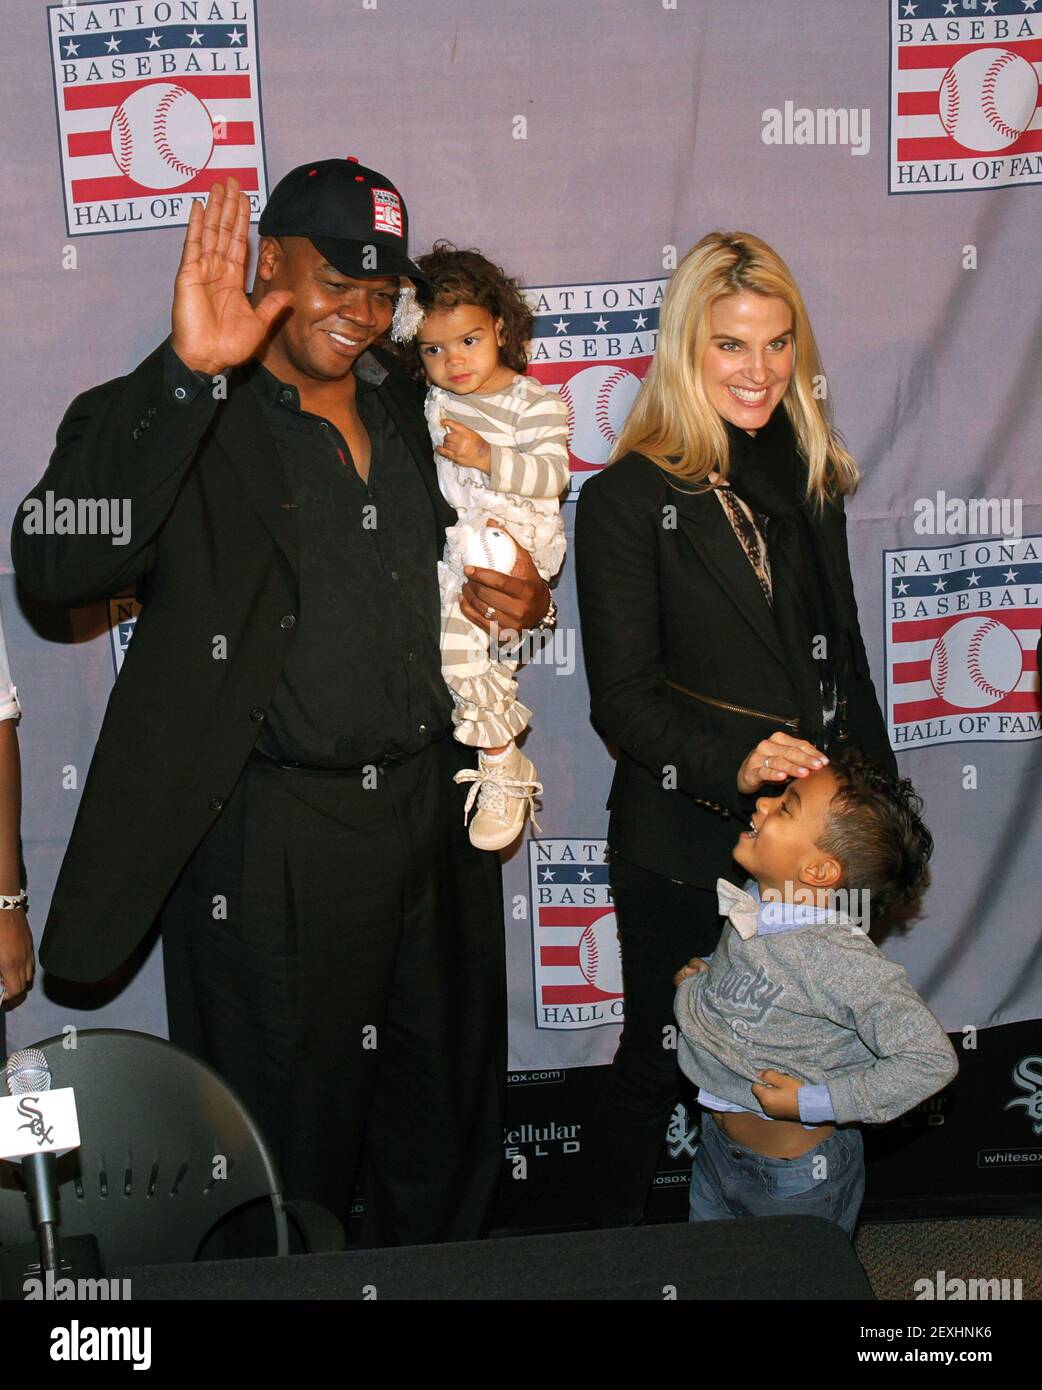 Frank Thomas arrives to a press conference with wife Meghan and kids  Ashley, being held, and Frank III, below, at U.S. Cellular Field in Chicago  on Wednesday, Jan. 8, 2014. Thomas was